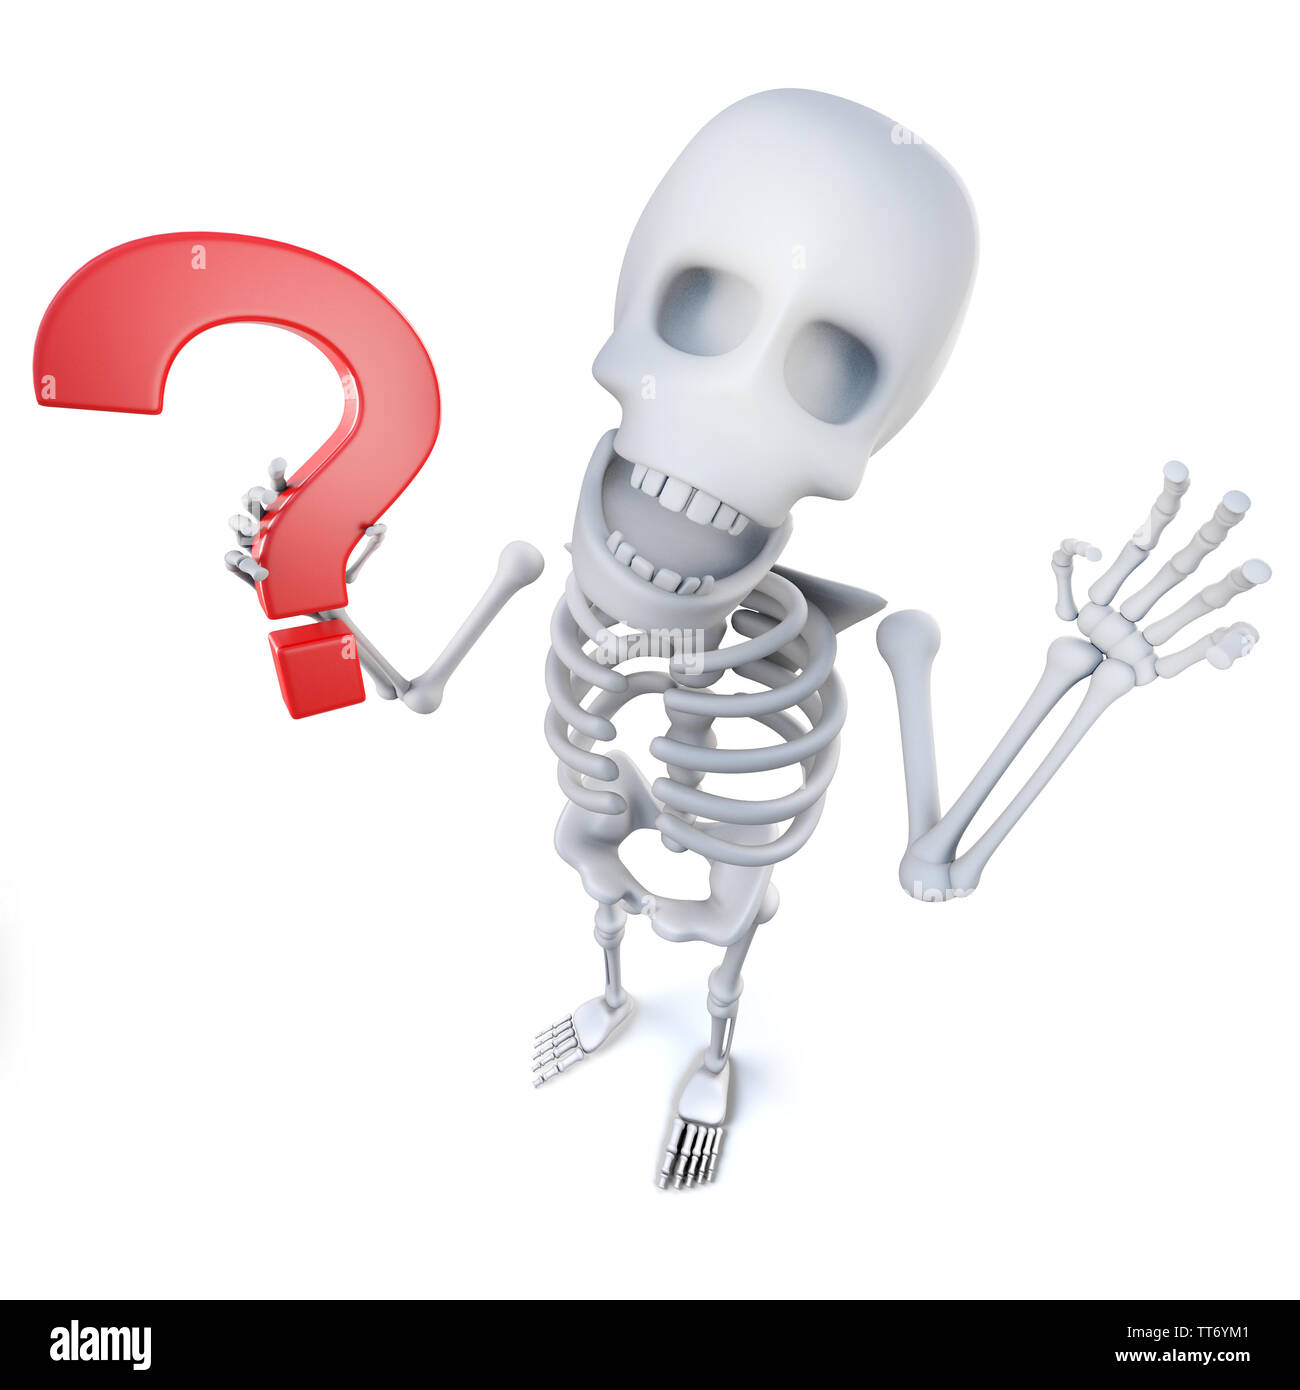 3d render of a funny cartoon skeleton character holding a question mark  symbol Stock Photo - Alamy